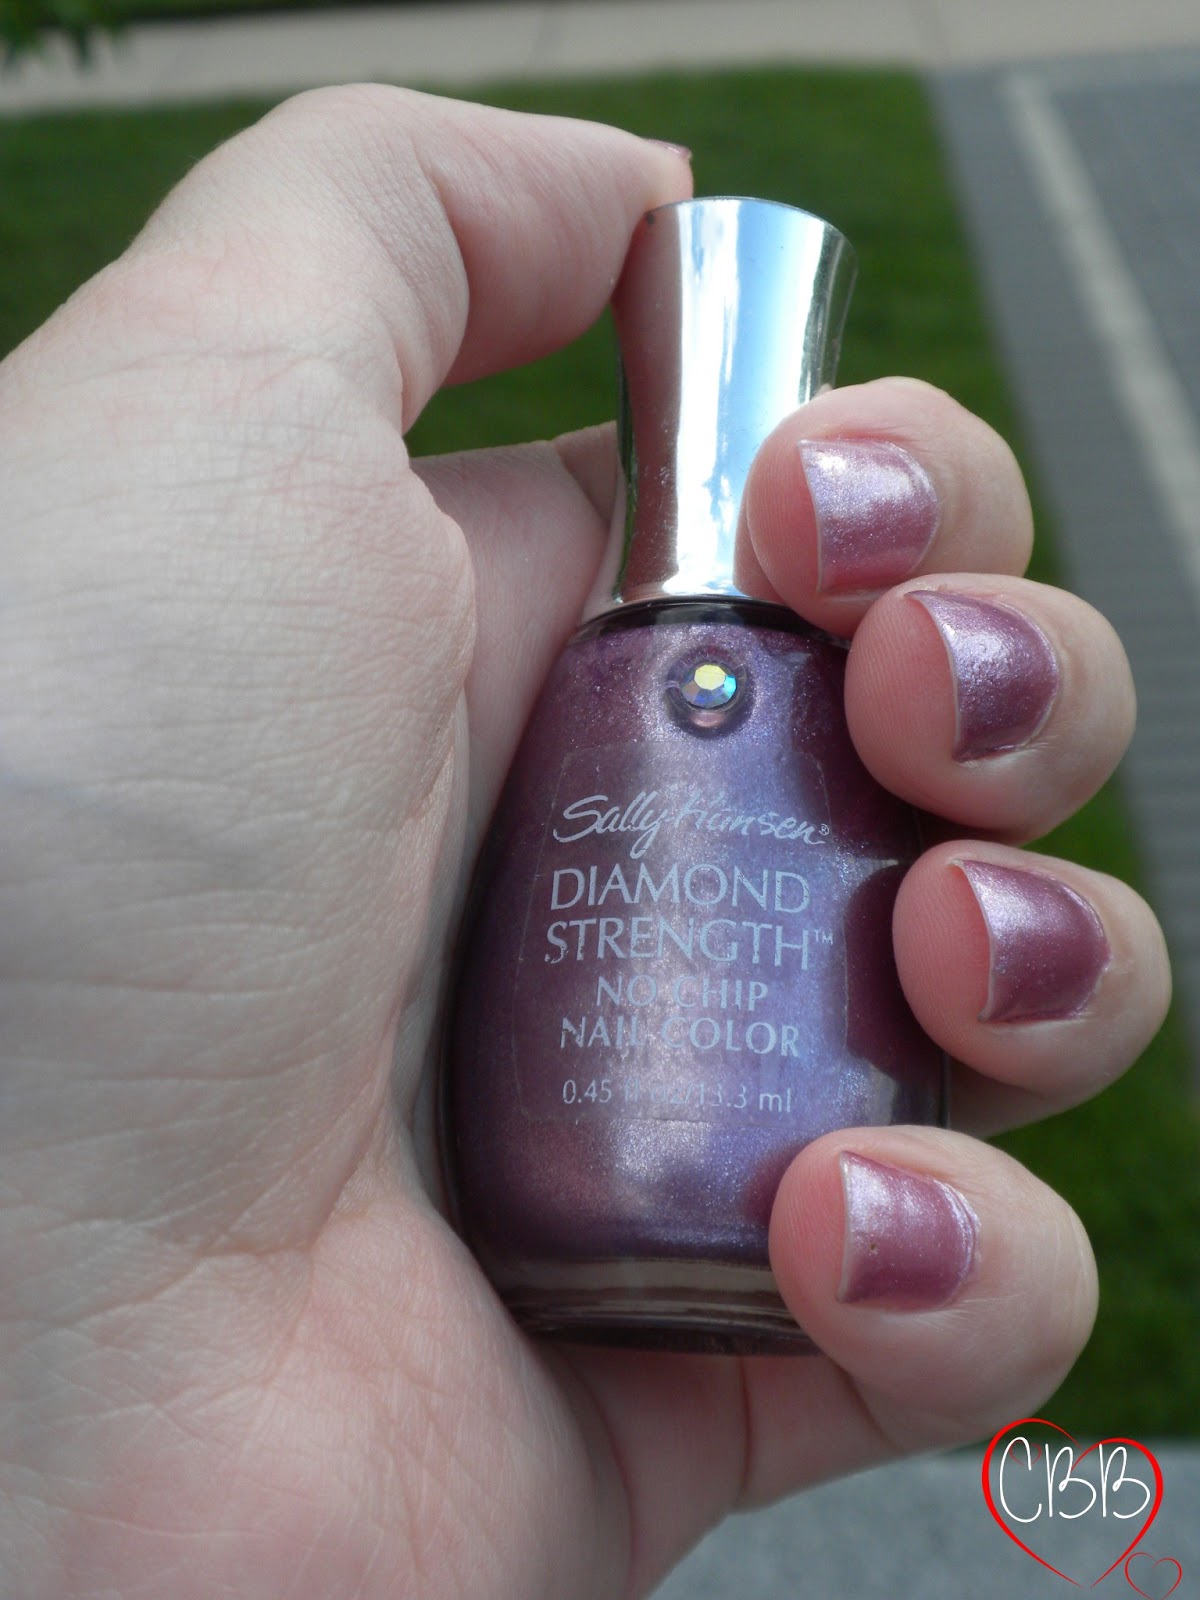 Sammi the Beauty Buff: Review: Sally Hansen Diamond Strength Nail Color in  Forever Lilac